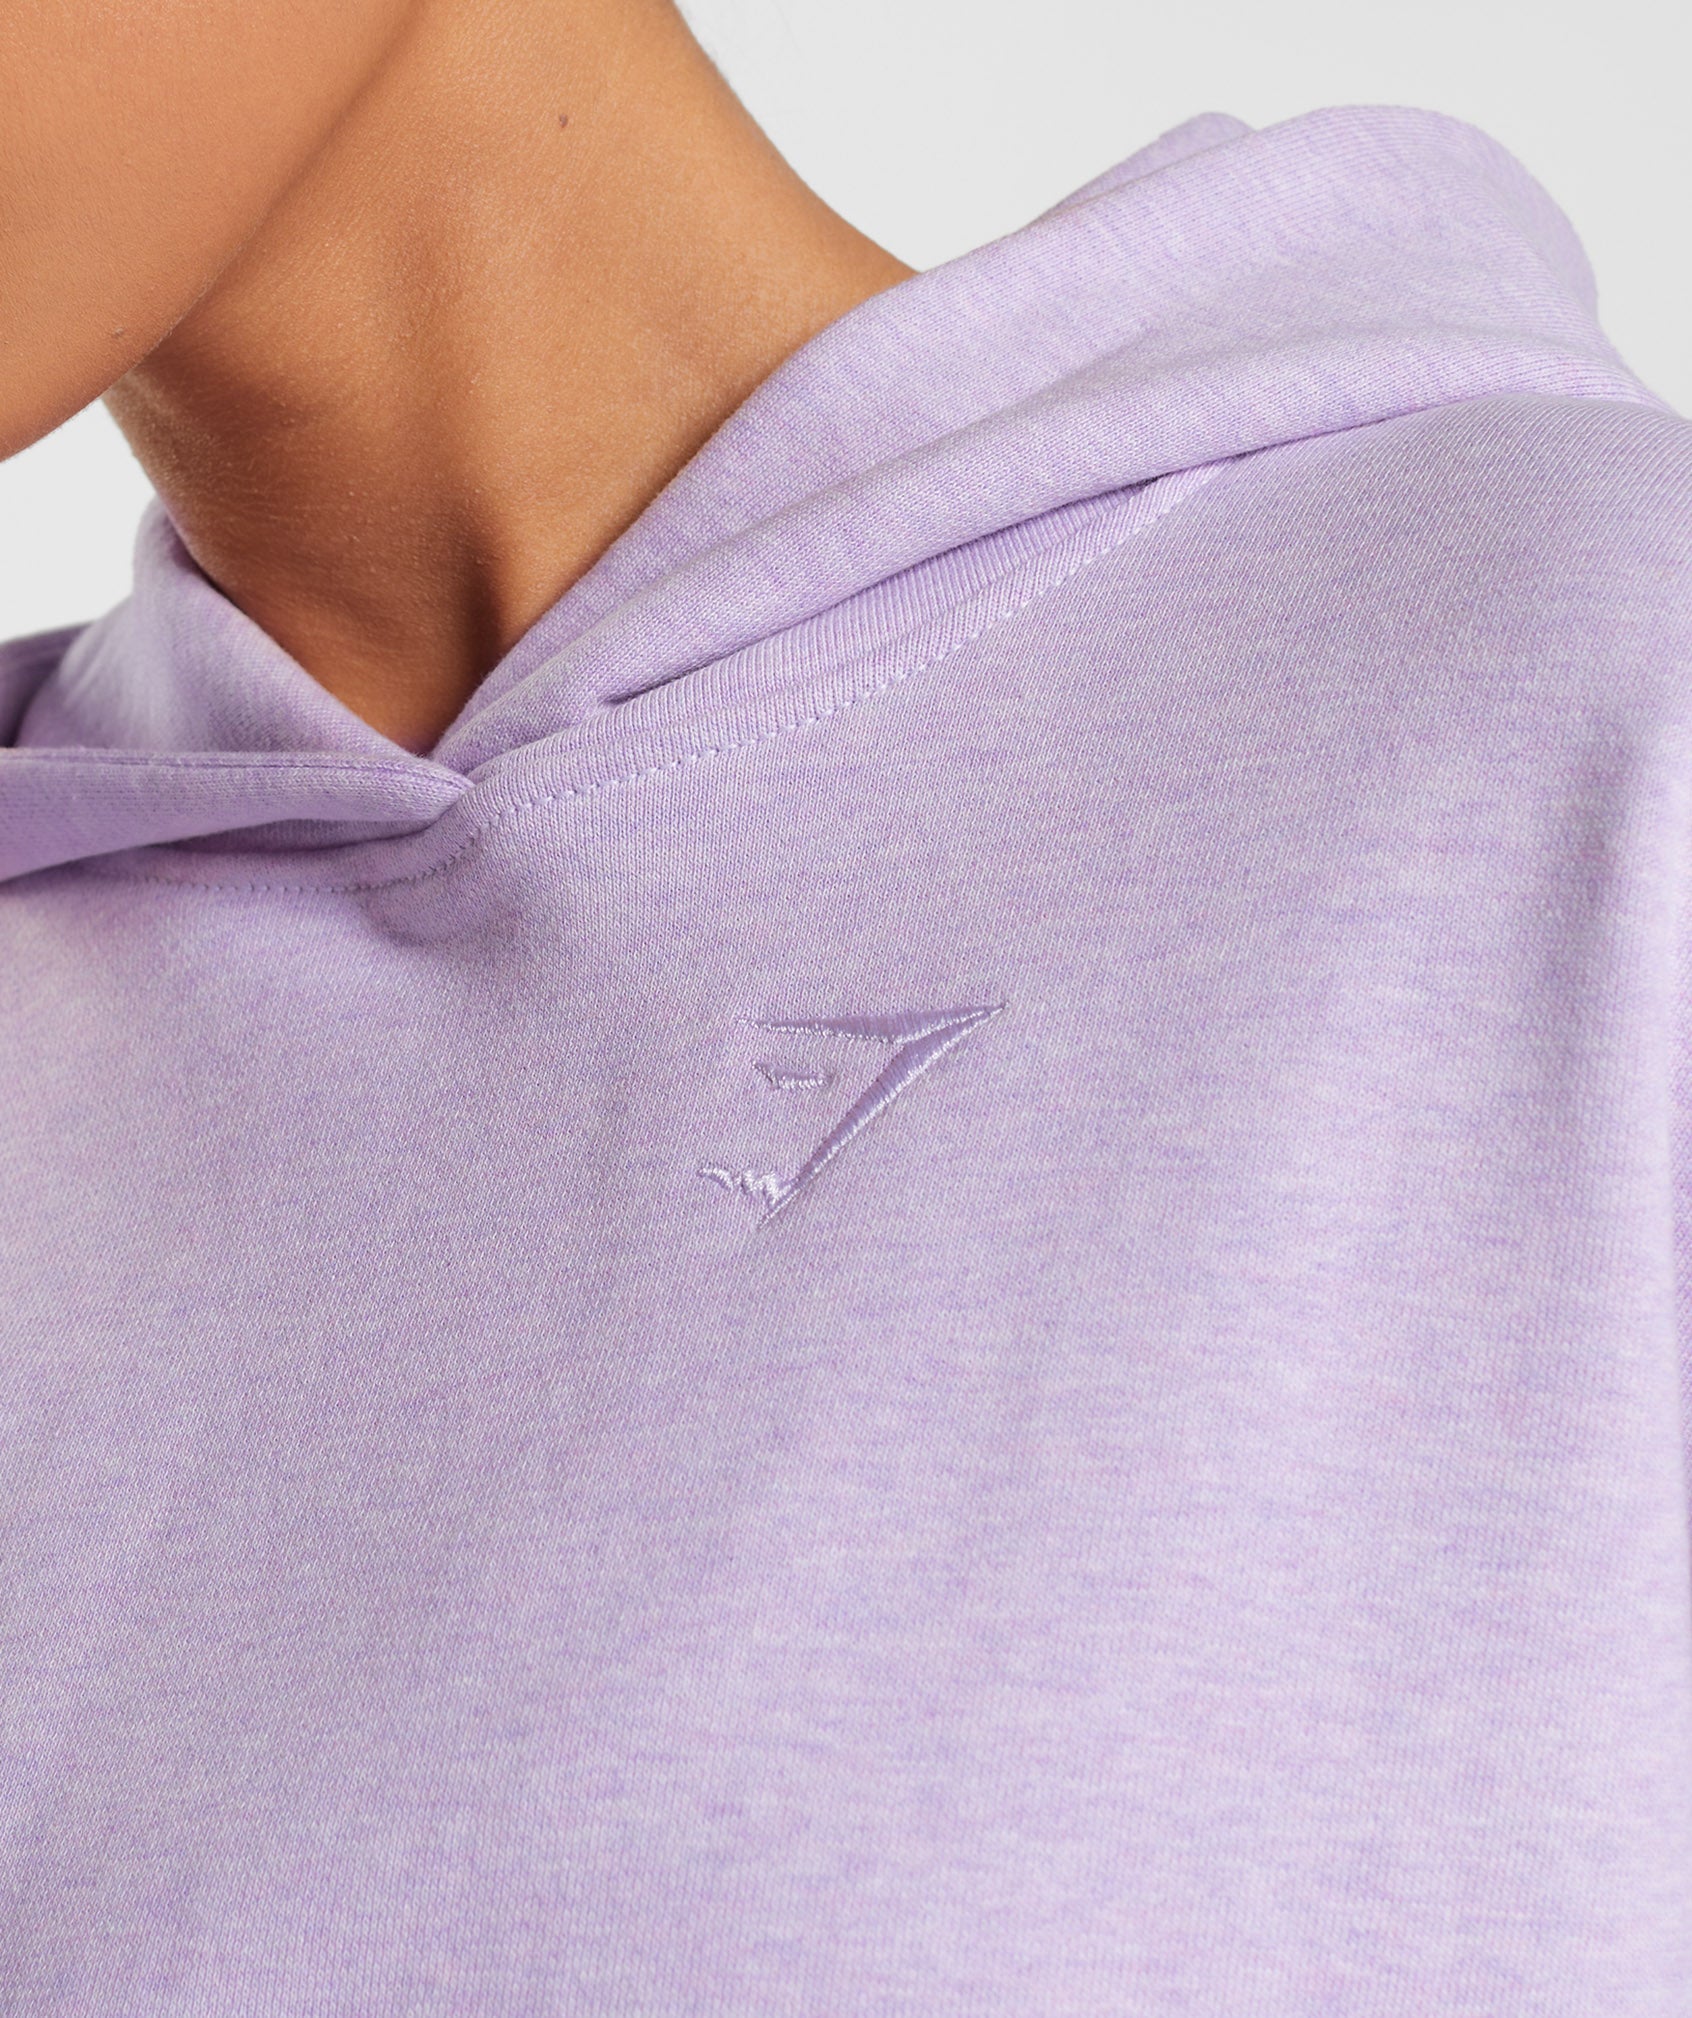 Rest Day Sweats Hoodie in Aura Lilac Marl